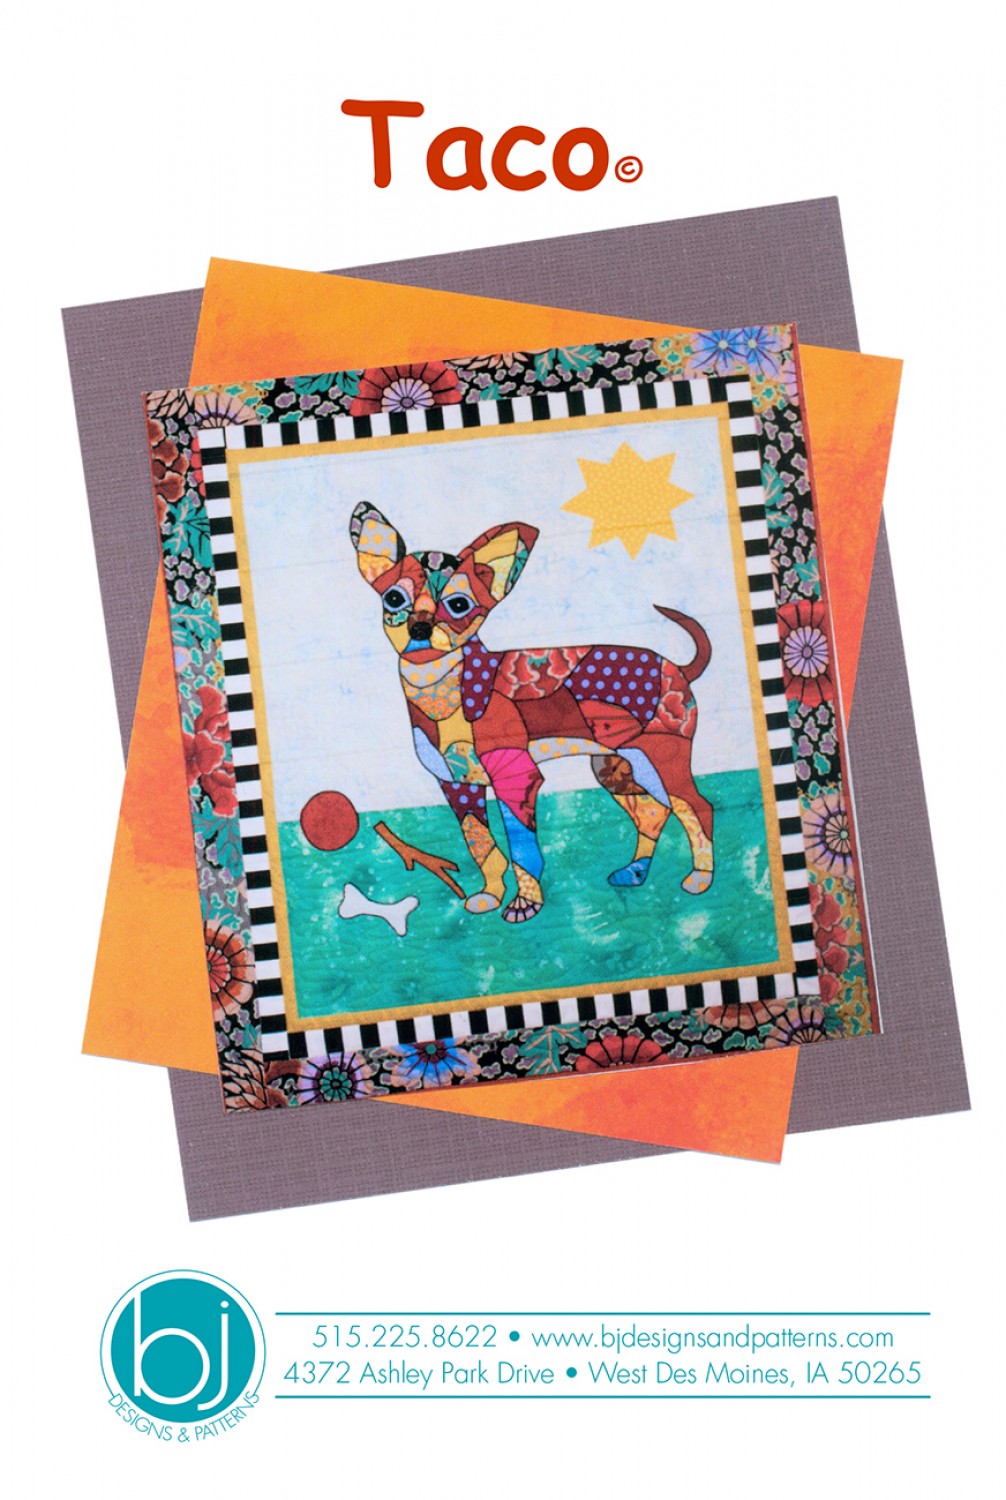 BJ Designs & Patterns Taco Chihuahua Dog Applique Quilt Pattern Front Cover